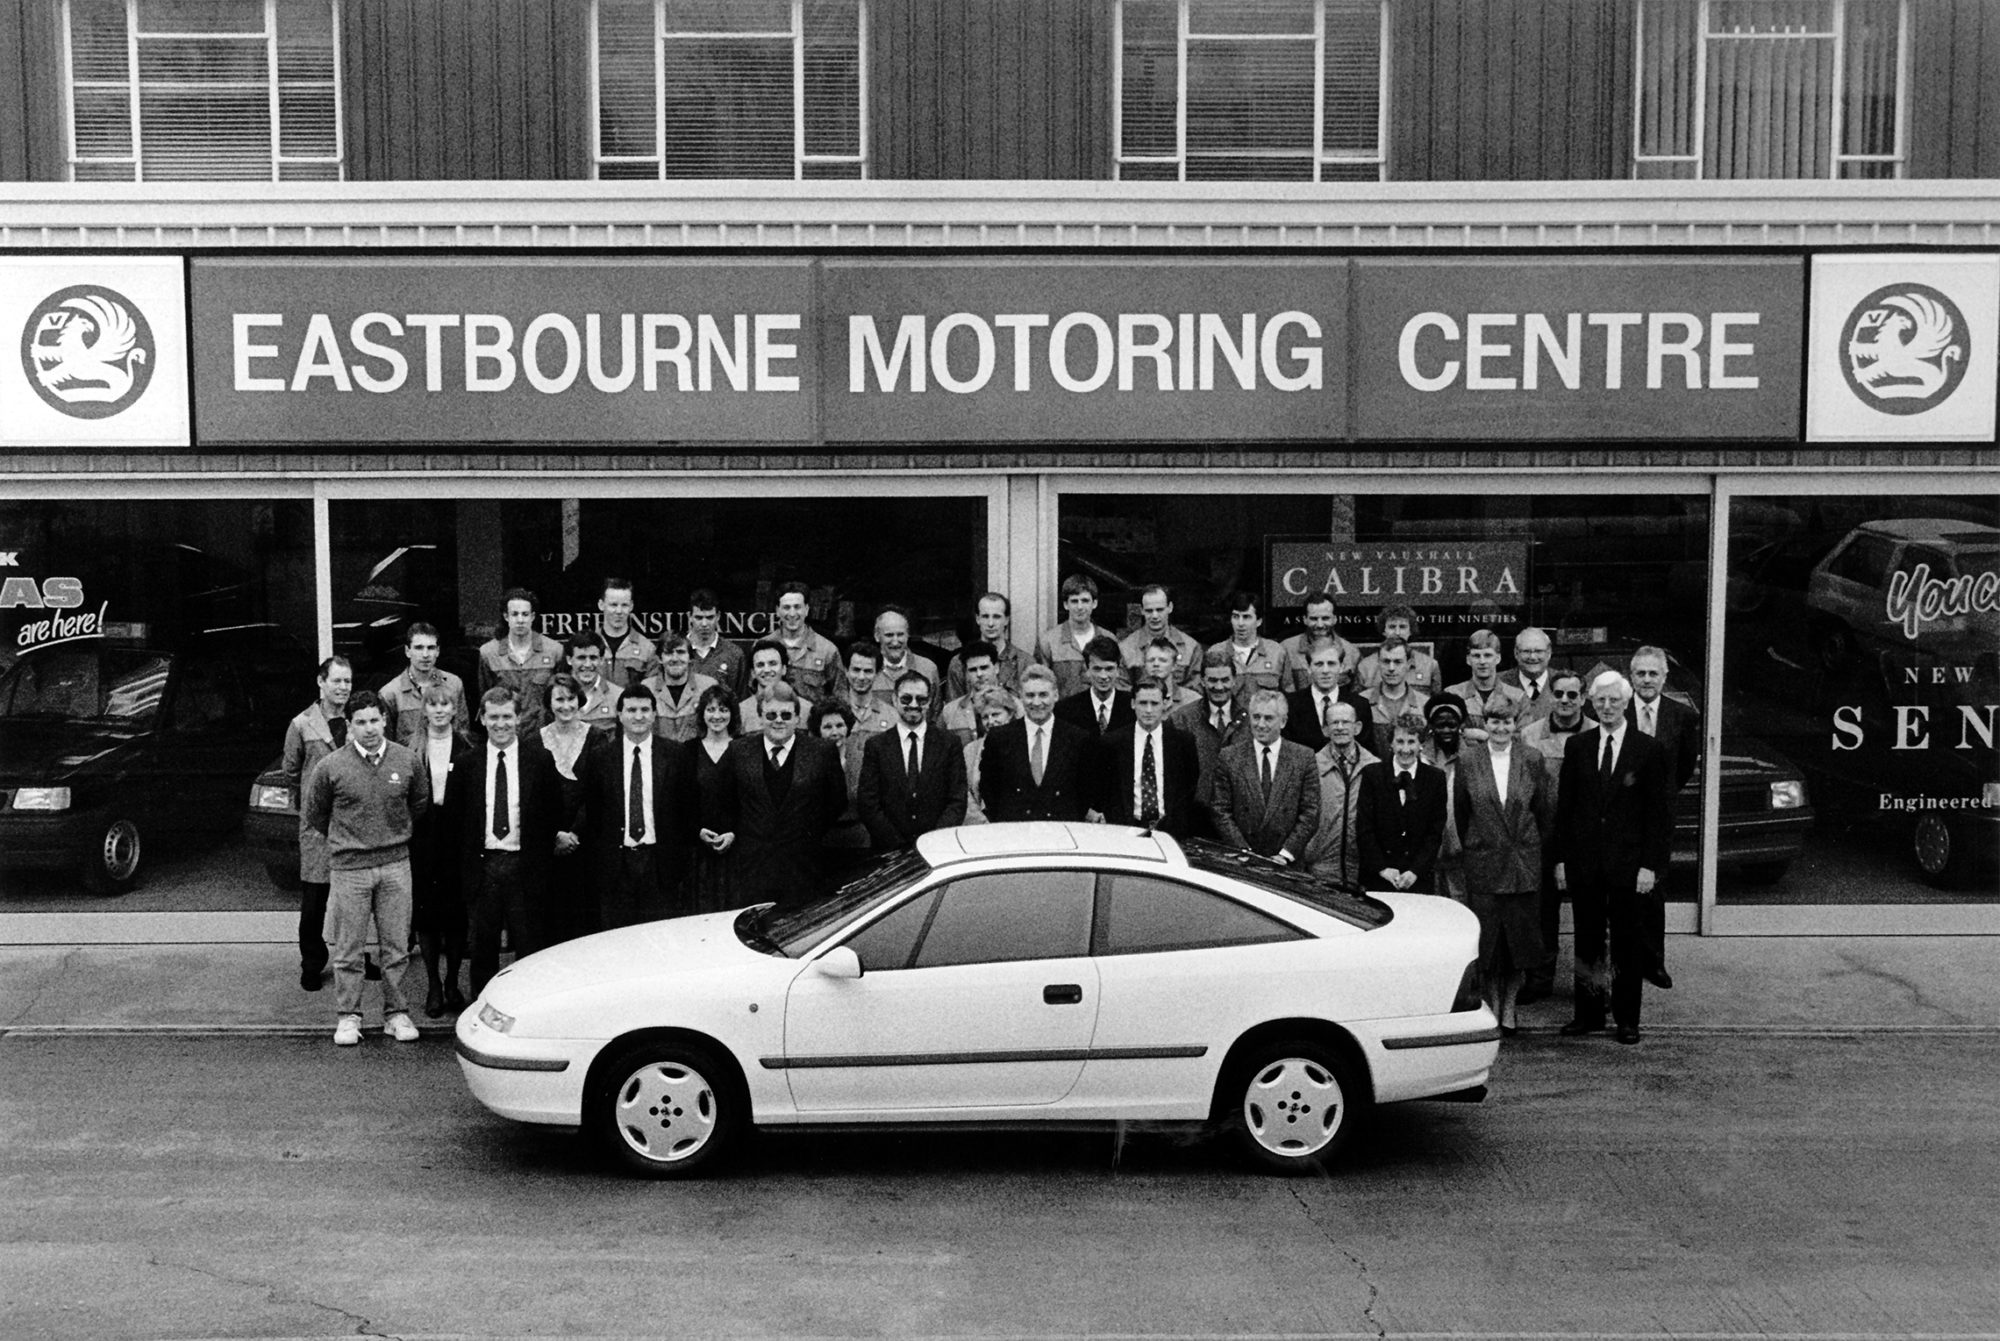 Eastbourne Motoring Centre Staff launching the Vauxhall Calibra in 1989